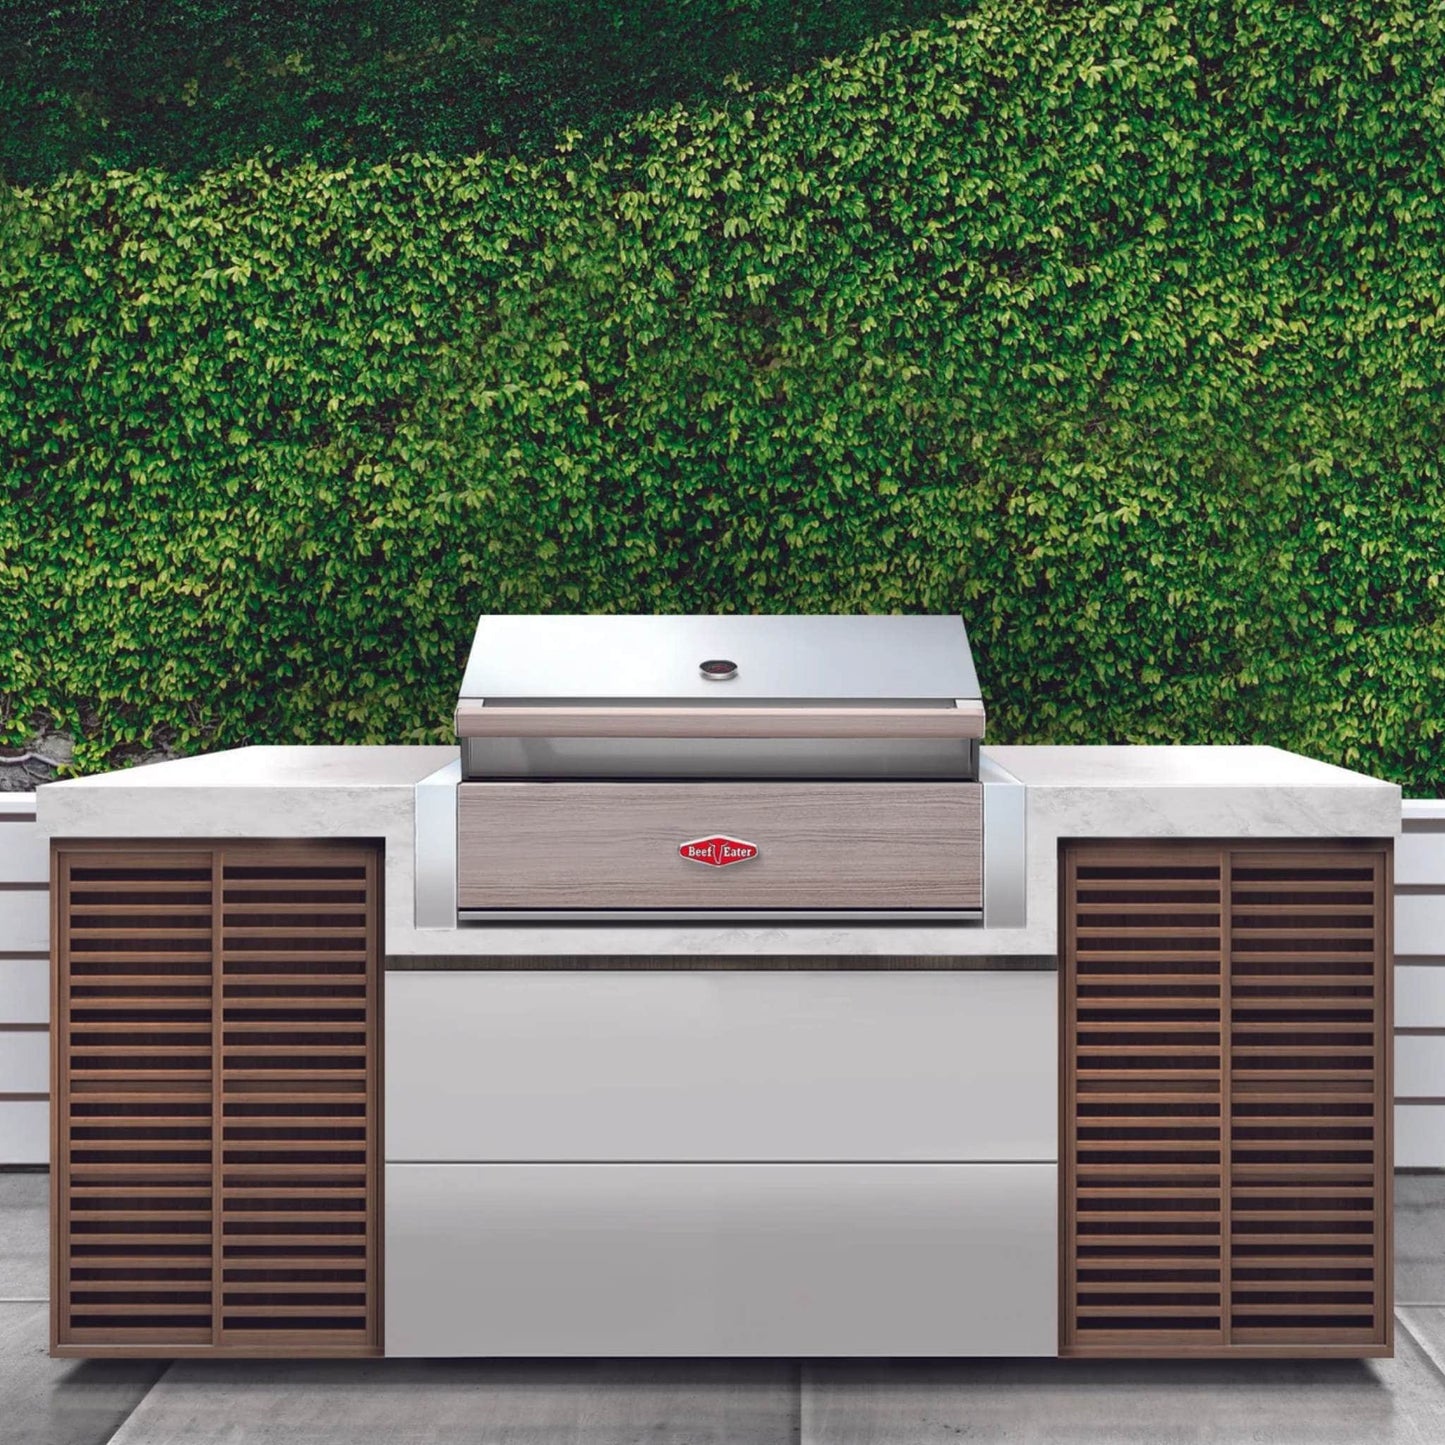 BeefEater 1500 Series - 4 Burner Built In BBQ